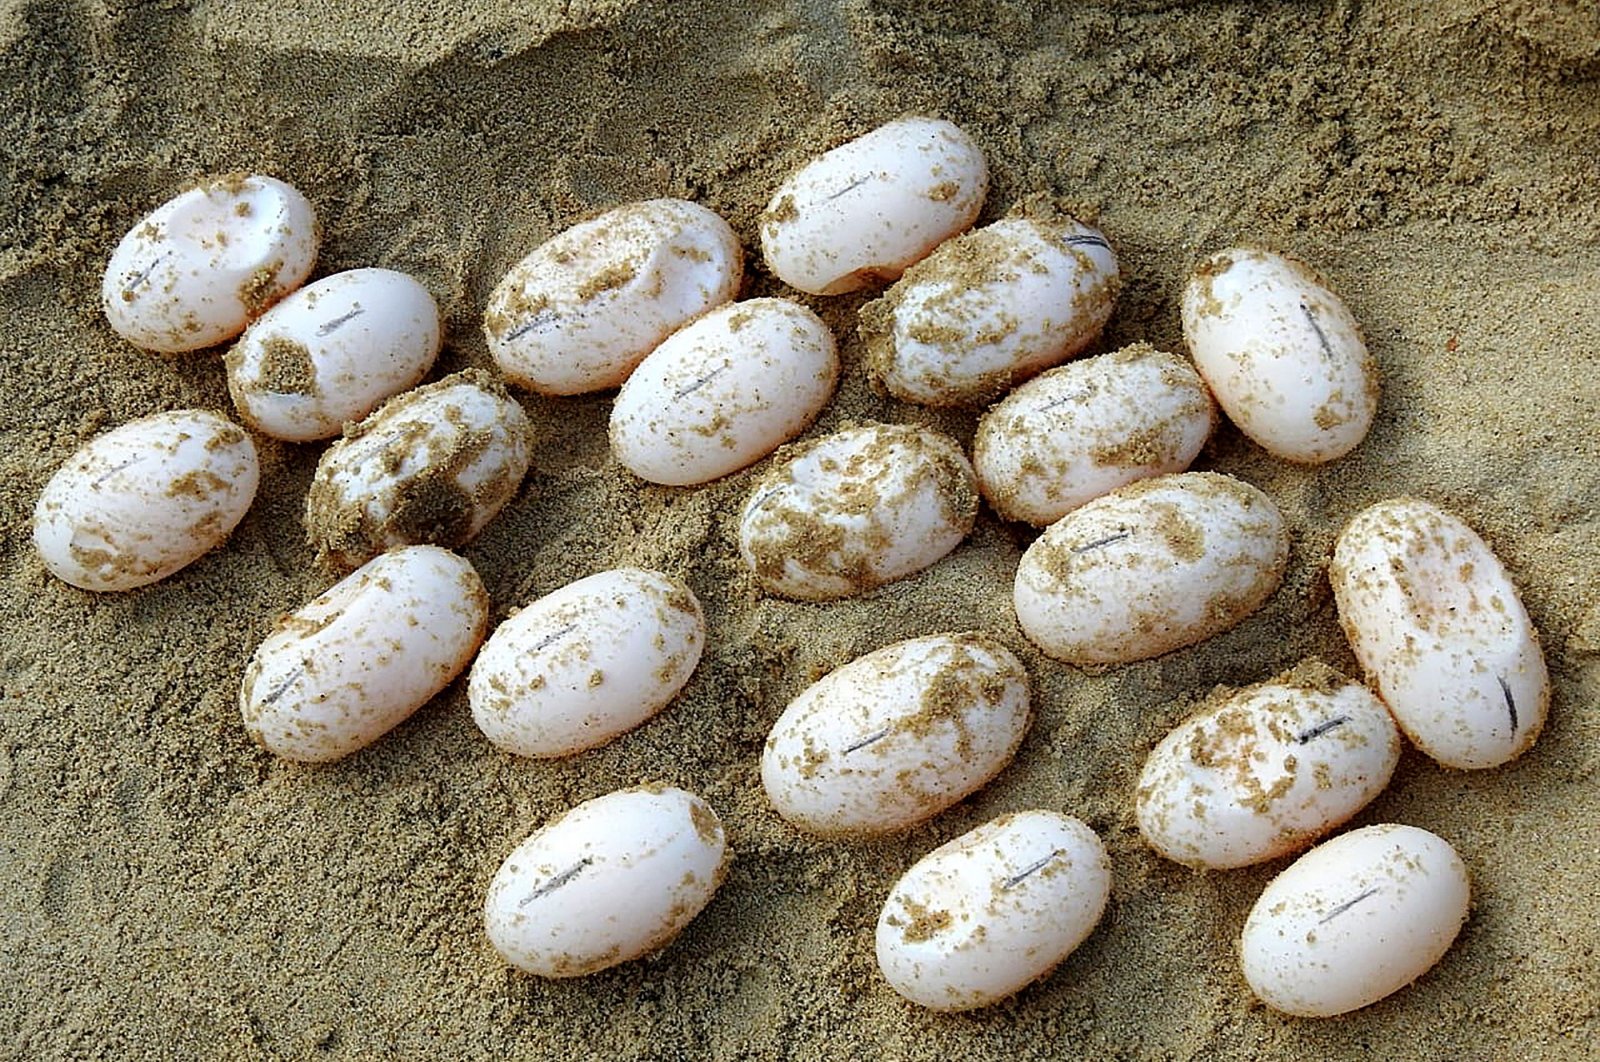 Royal turtle eggs on the sand at the Koh Kong Reptile Conservation Center (KKRCC) in Koh Kong province, Cambodia, photo released on March 2, 2021. (Wildlife Conservation Society via AFP)